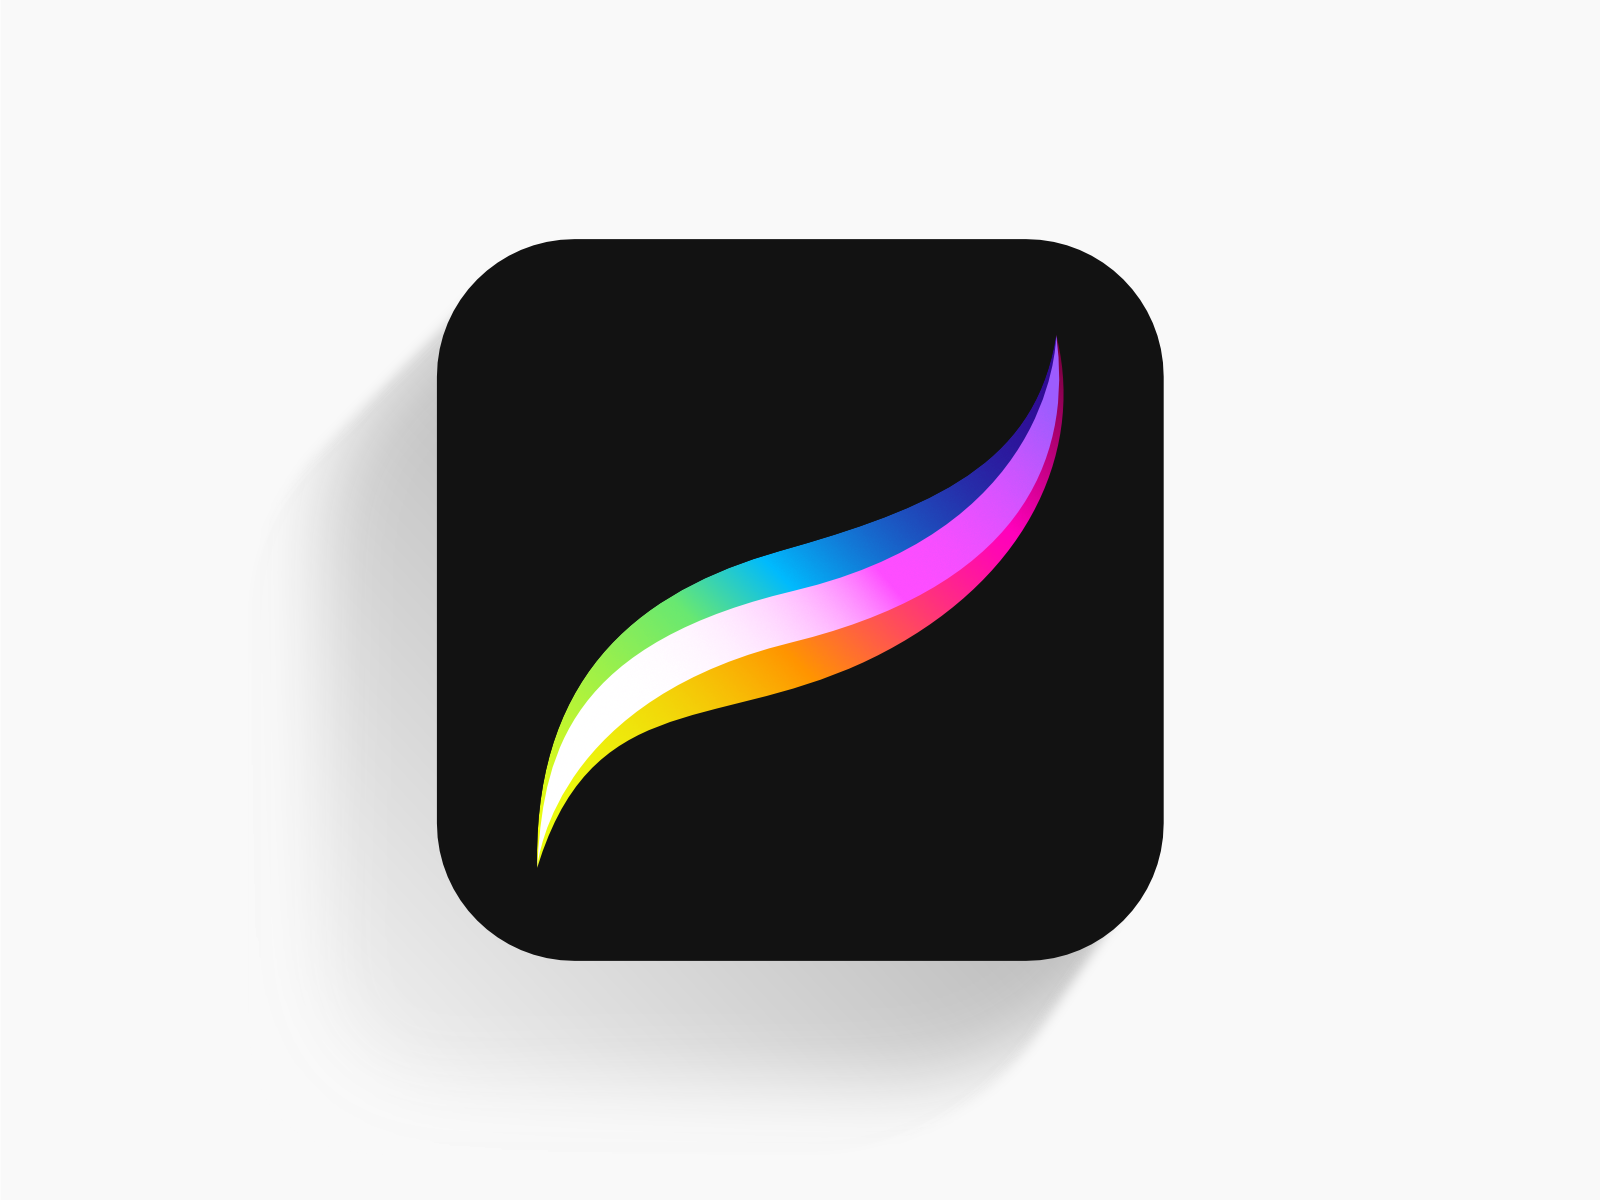 procreate-logo-redesign-by-kyle-chicoine-on-dribbble